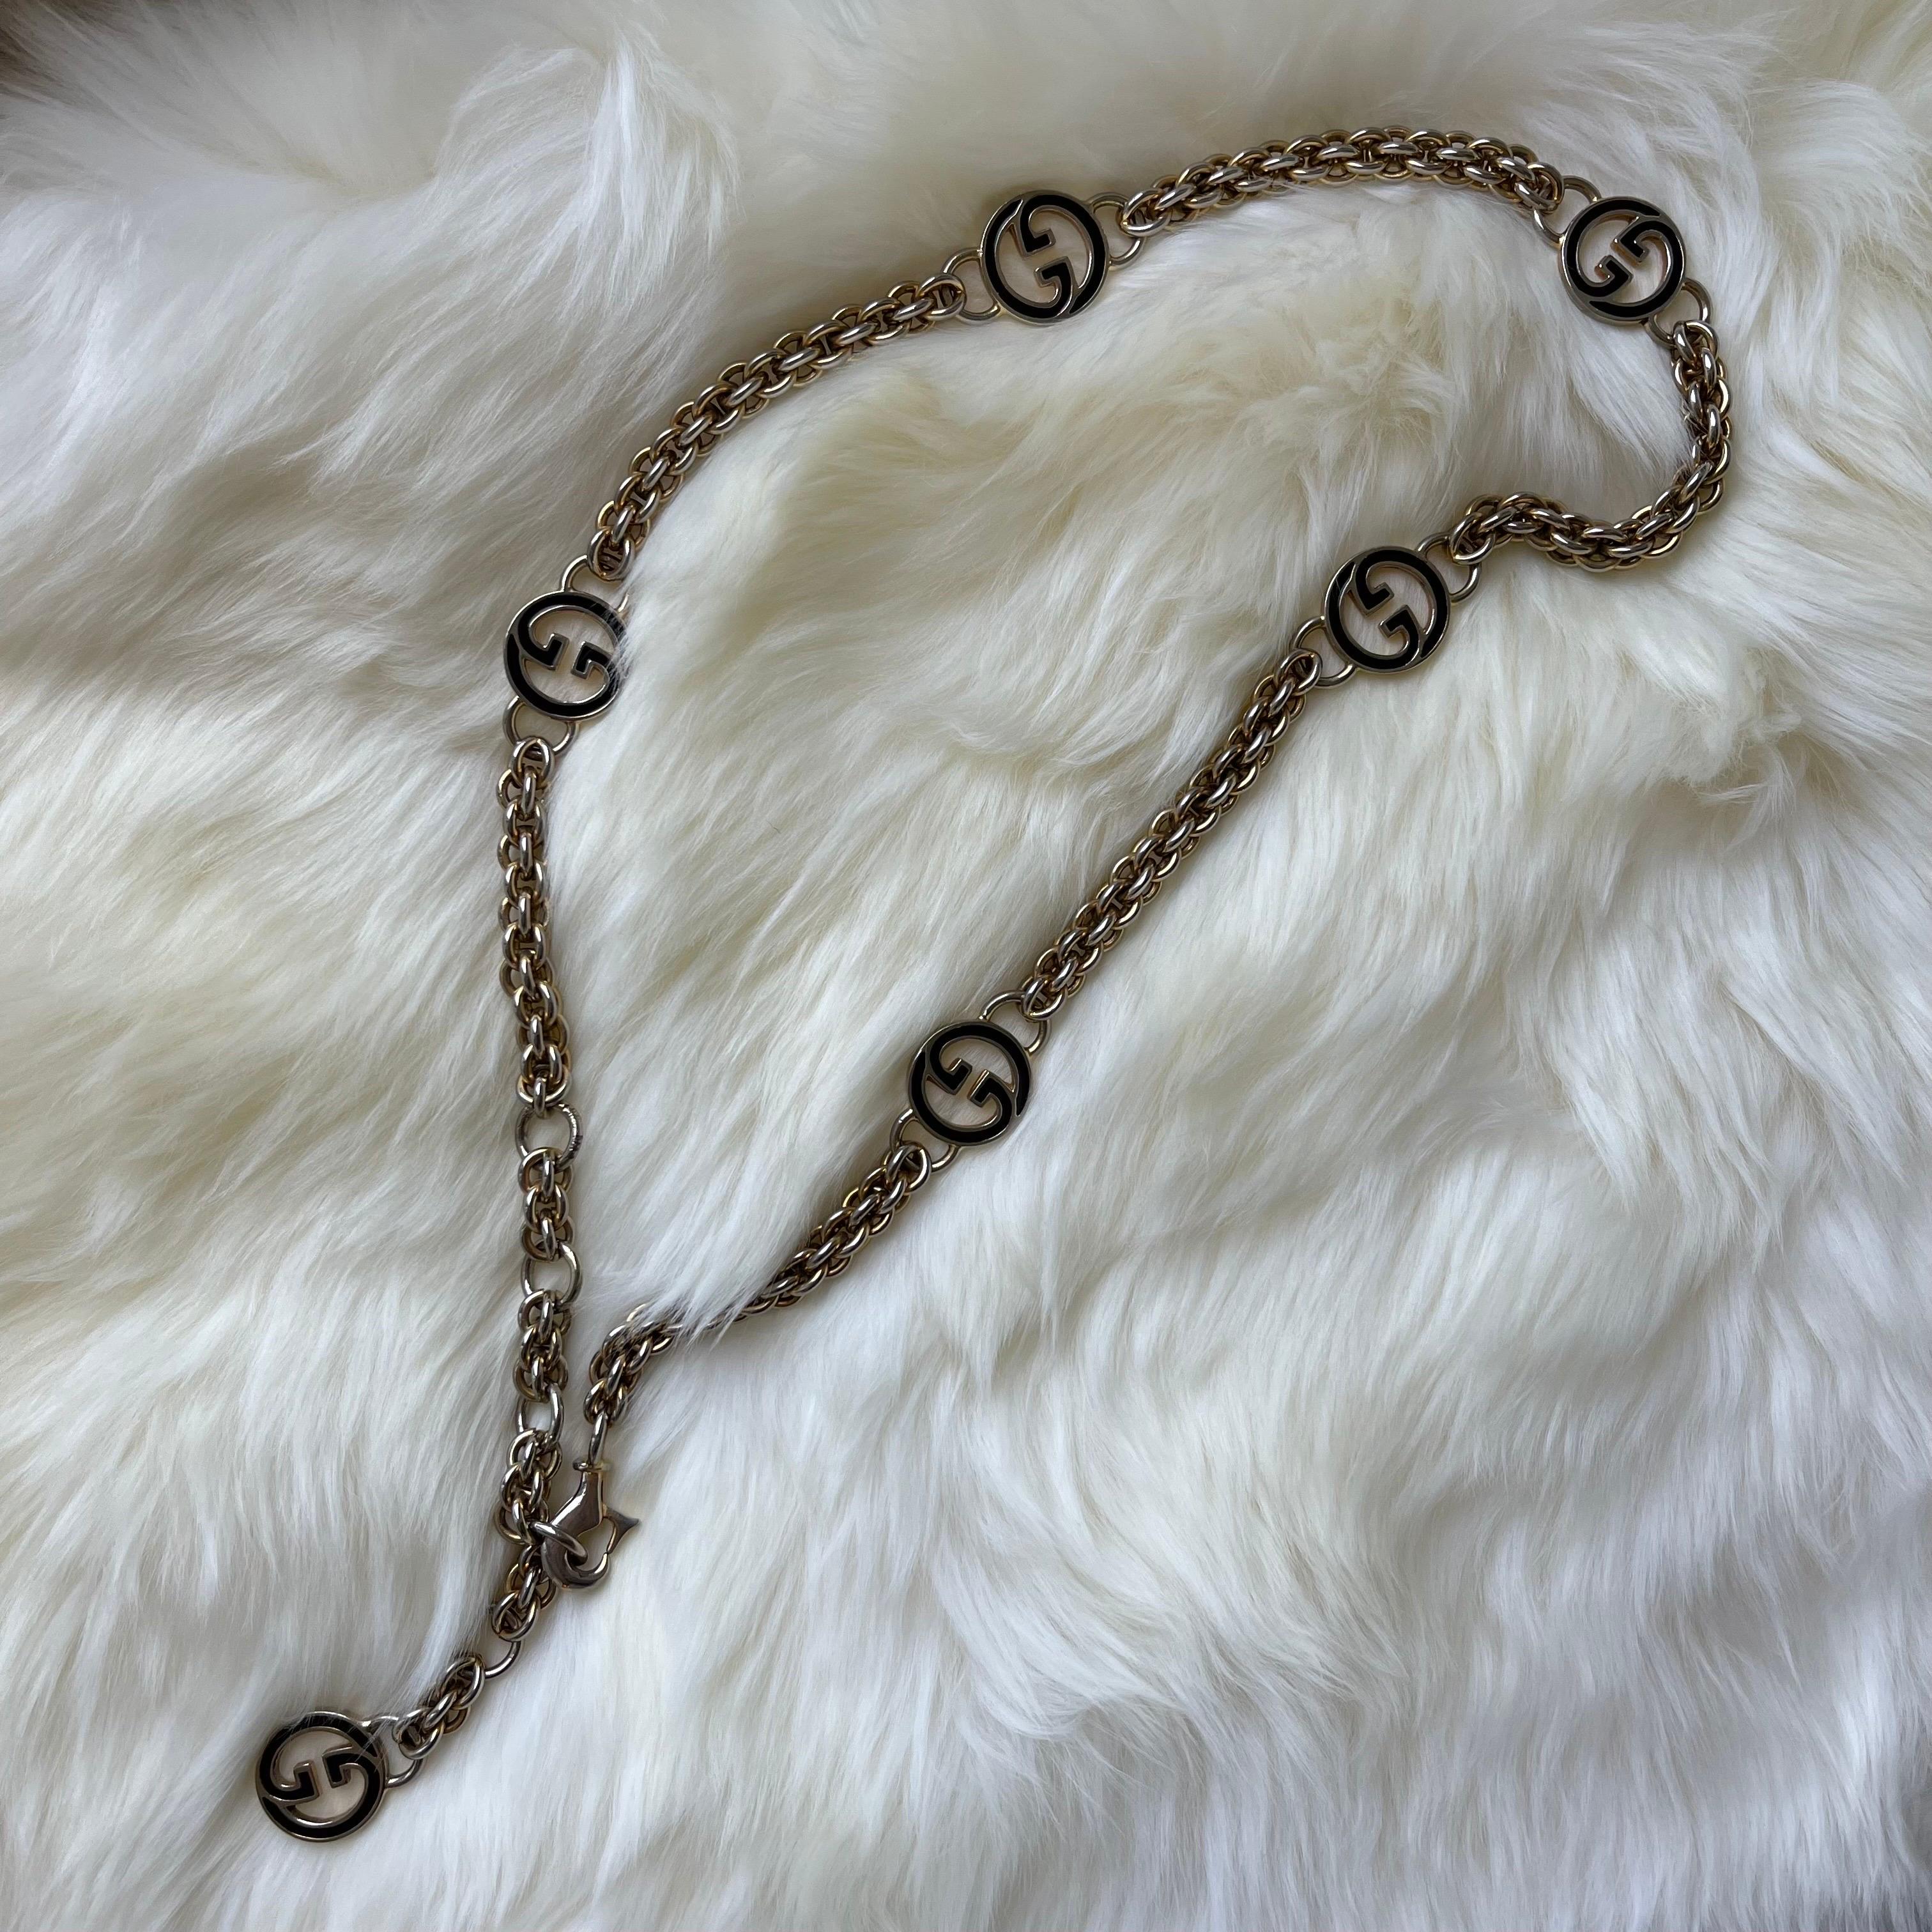 This stunning vintage Gucci necklace features a two tone, gold and silver chain, and black GG pendents. 

In such amazing condition, you can wear it a million ways! You Cain make it a chunky bracelet, falling down necklace, or even a waist